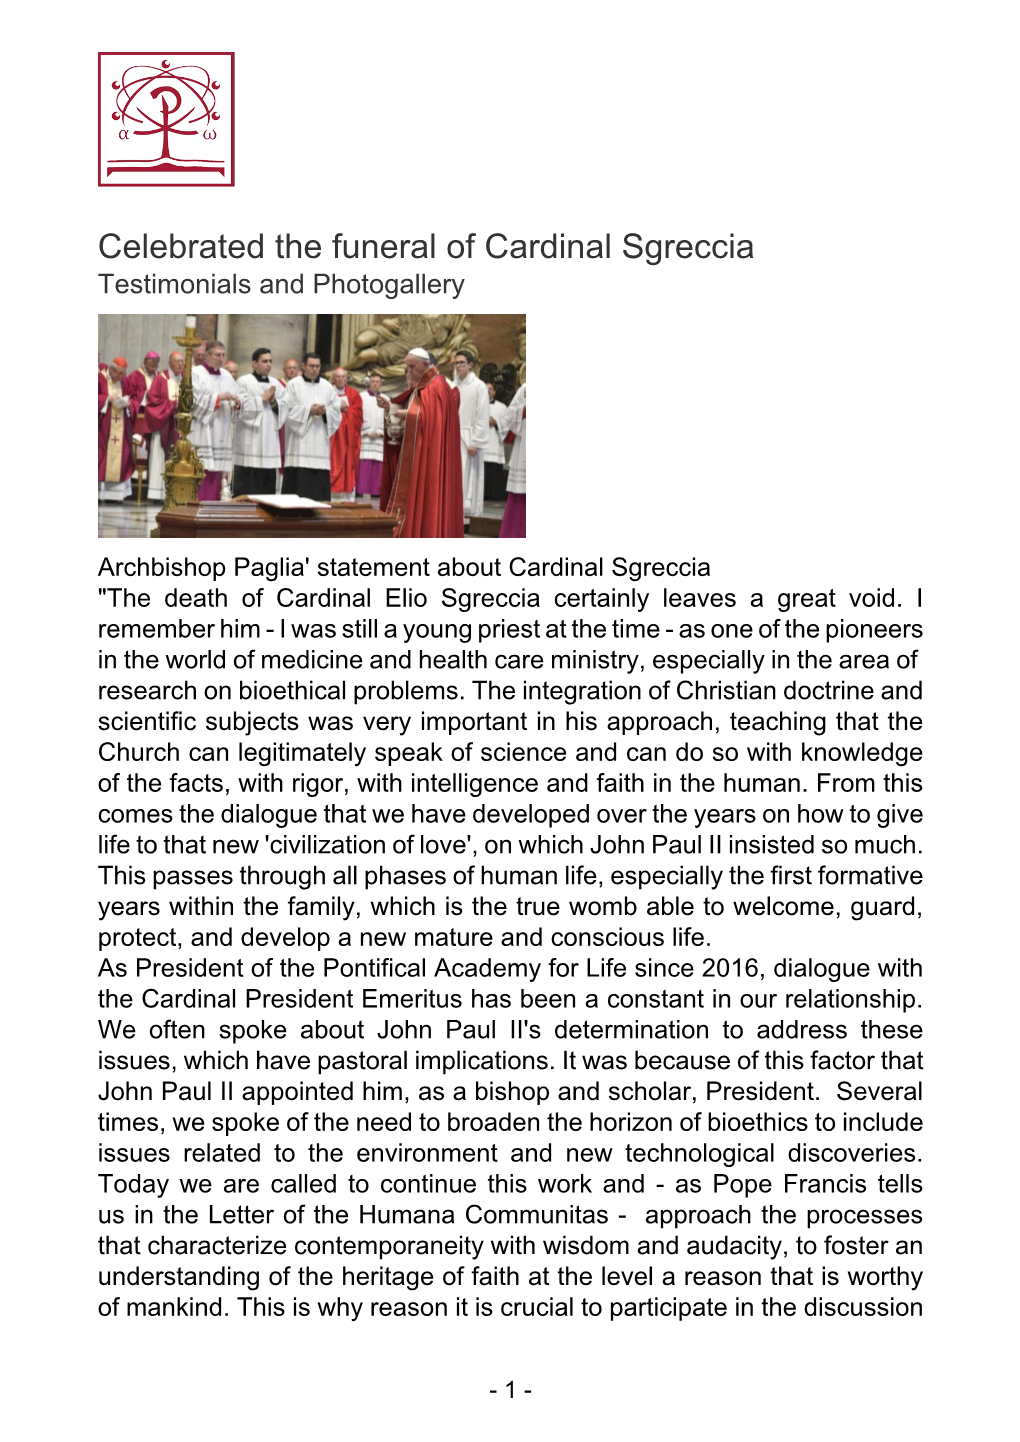 Celebrated the Funeral of Cardinal Sgreccia Testimonials and Photogallery